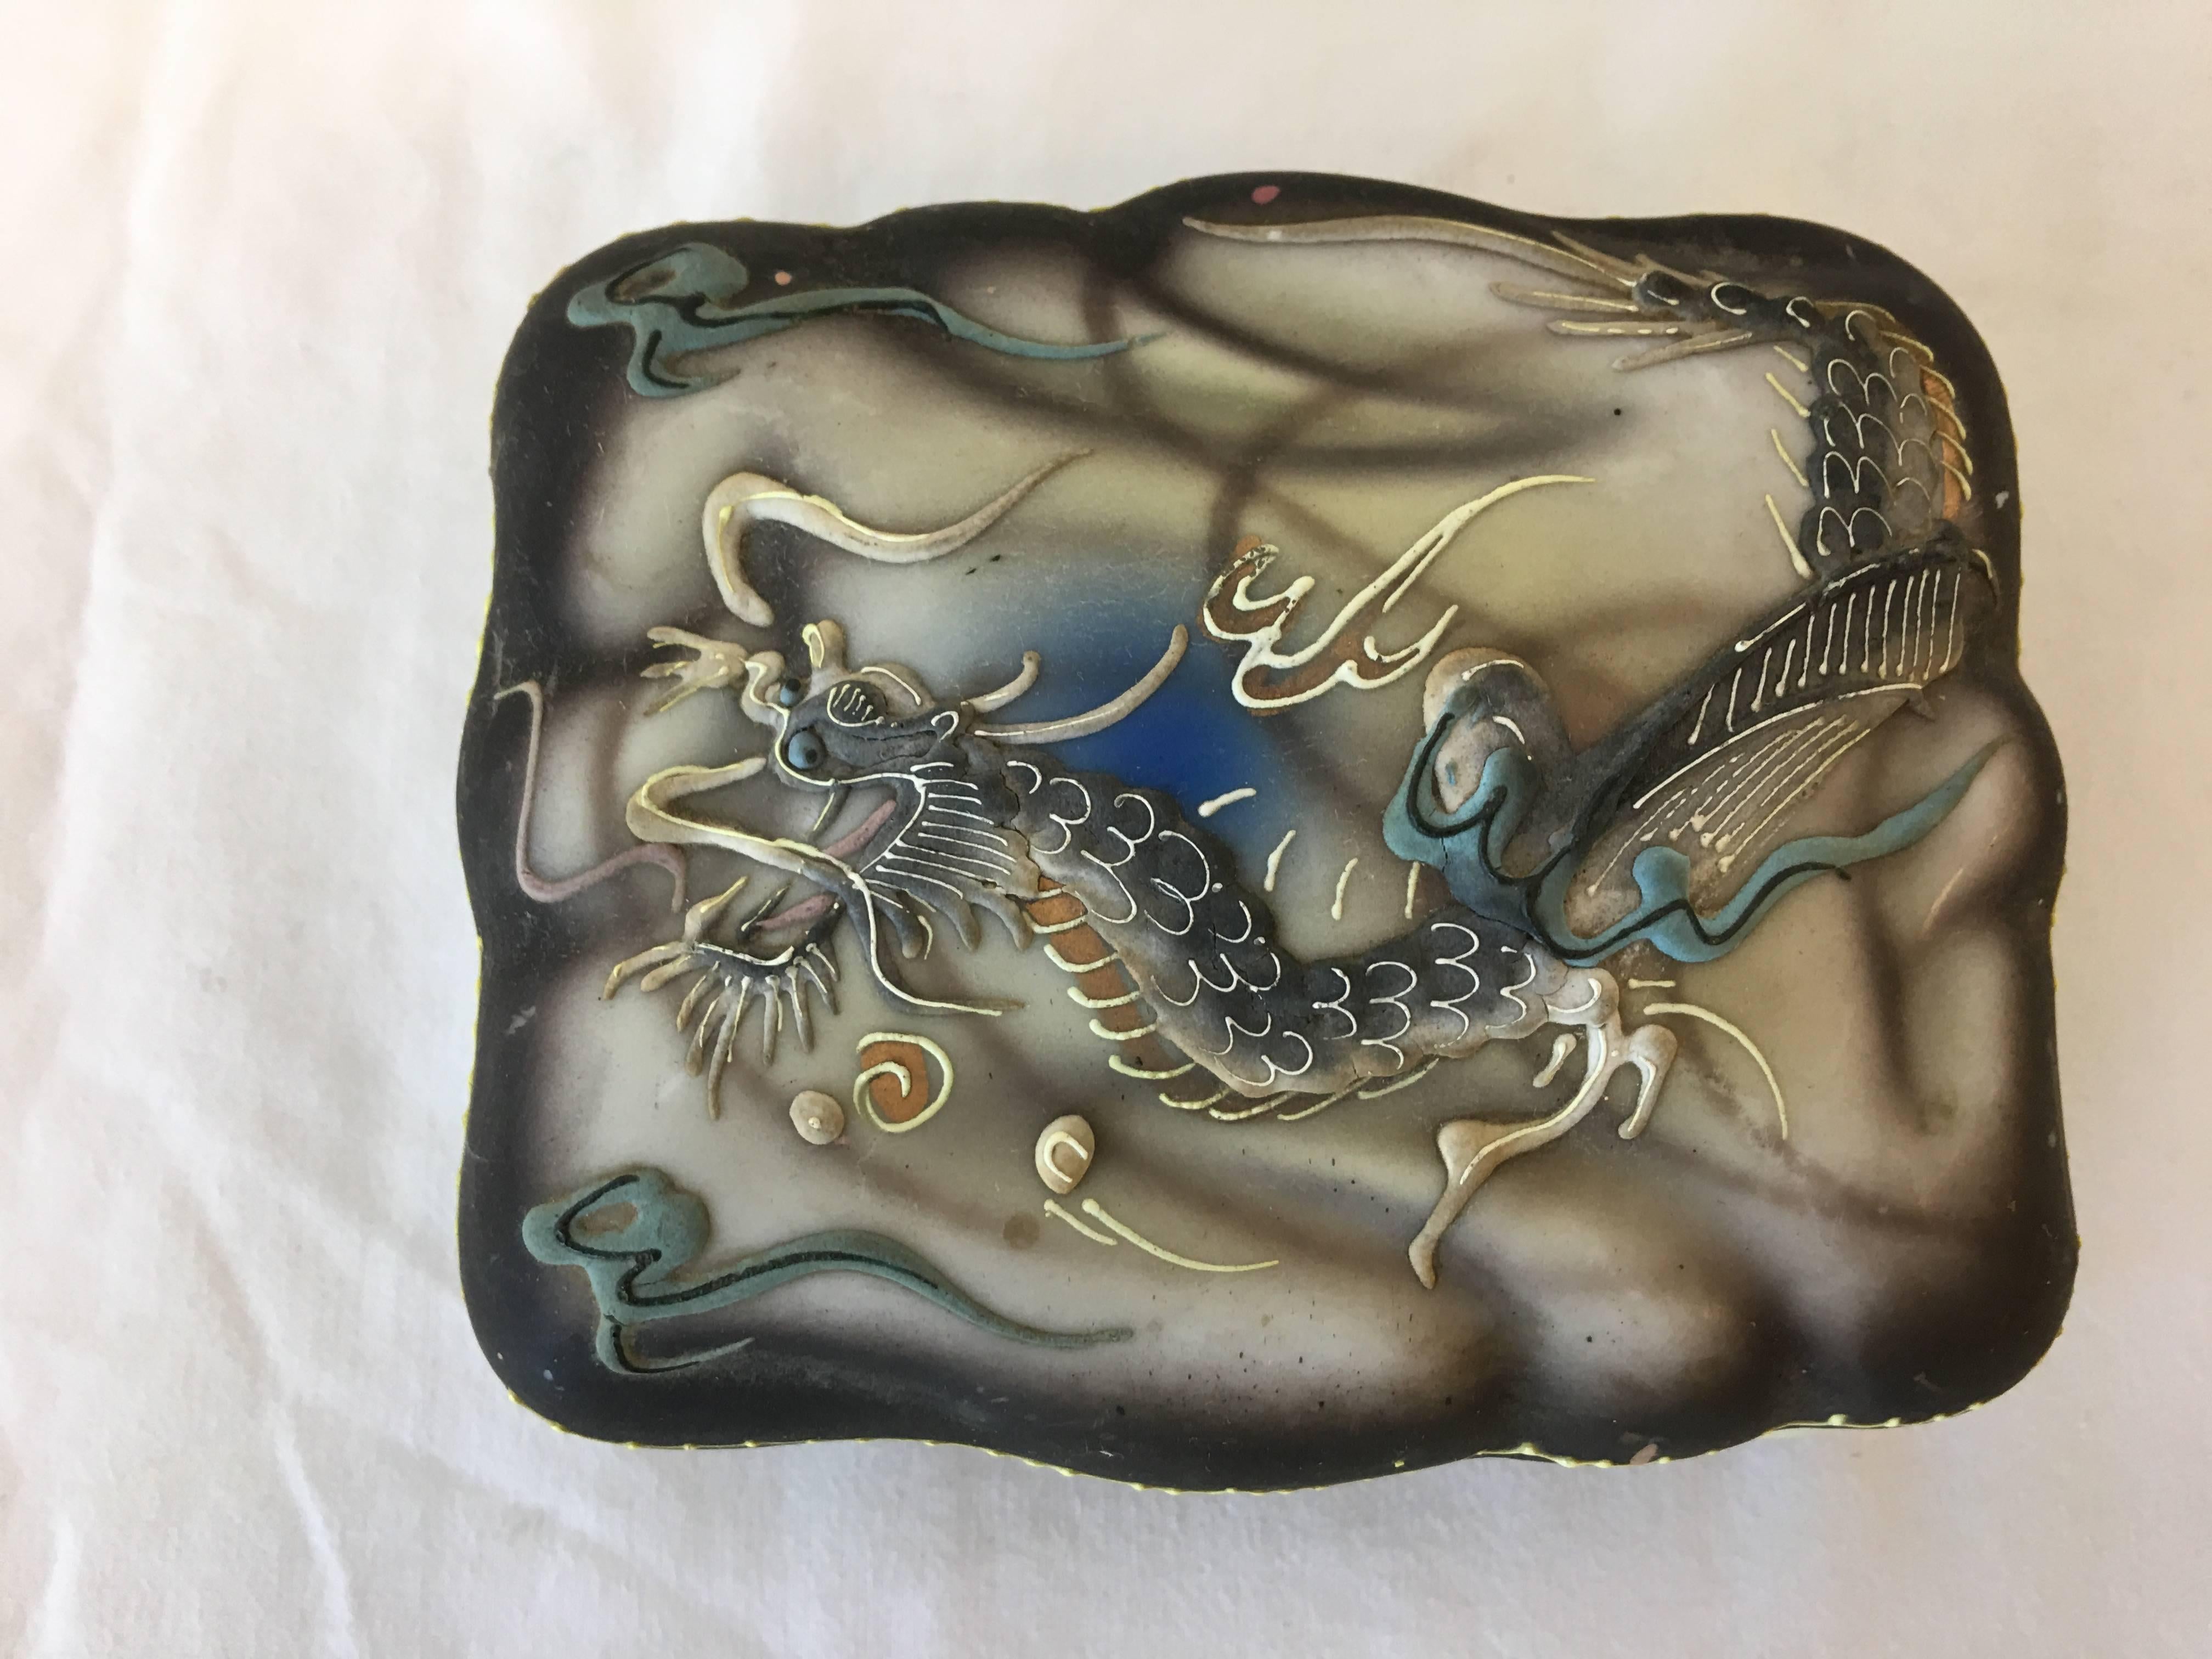 Hand-Painted 1920s Art Deco Chinoiserie Decorative Trinket Box with Dragon Motif